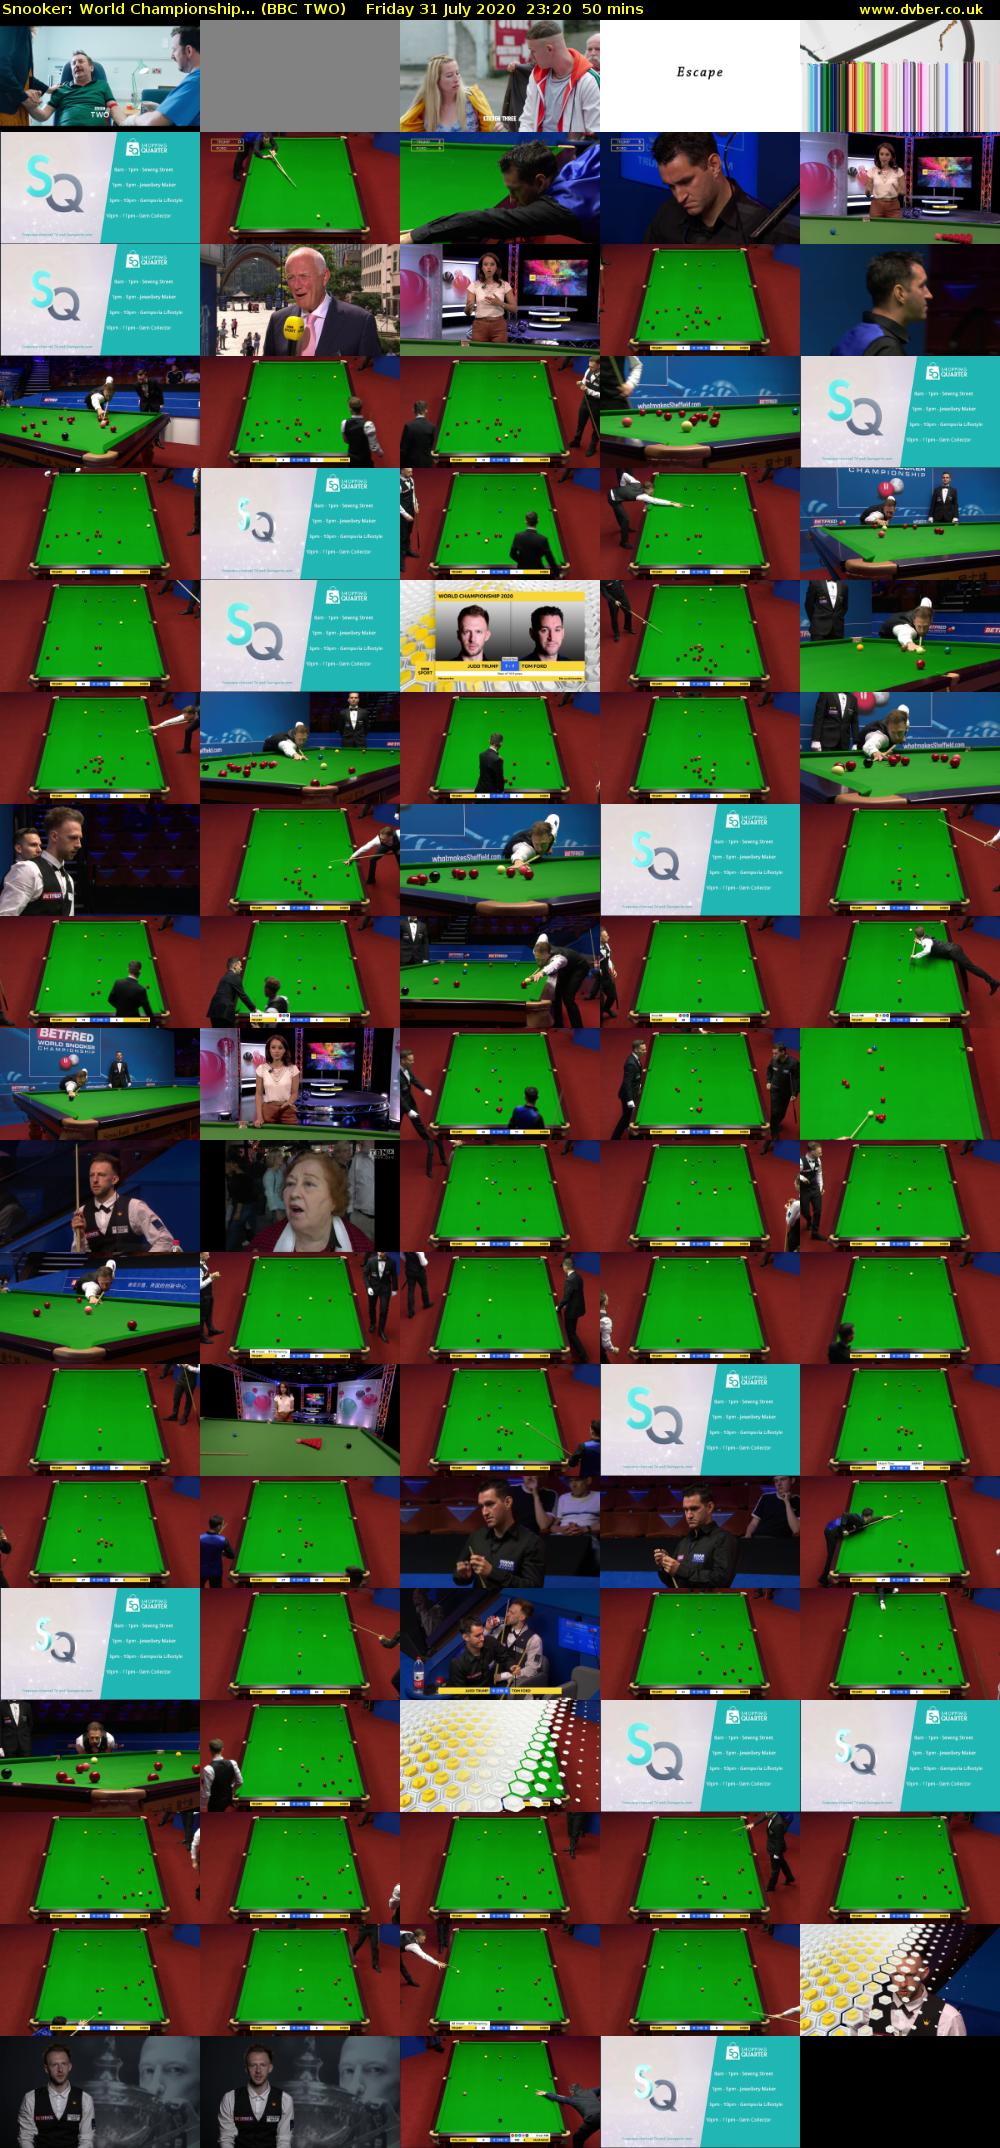 Snooker: World Championship... (BBC TWO) Friday 31 July 2020 23:20 - 00:10